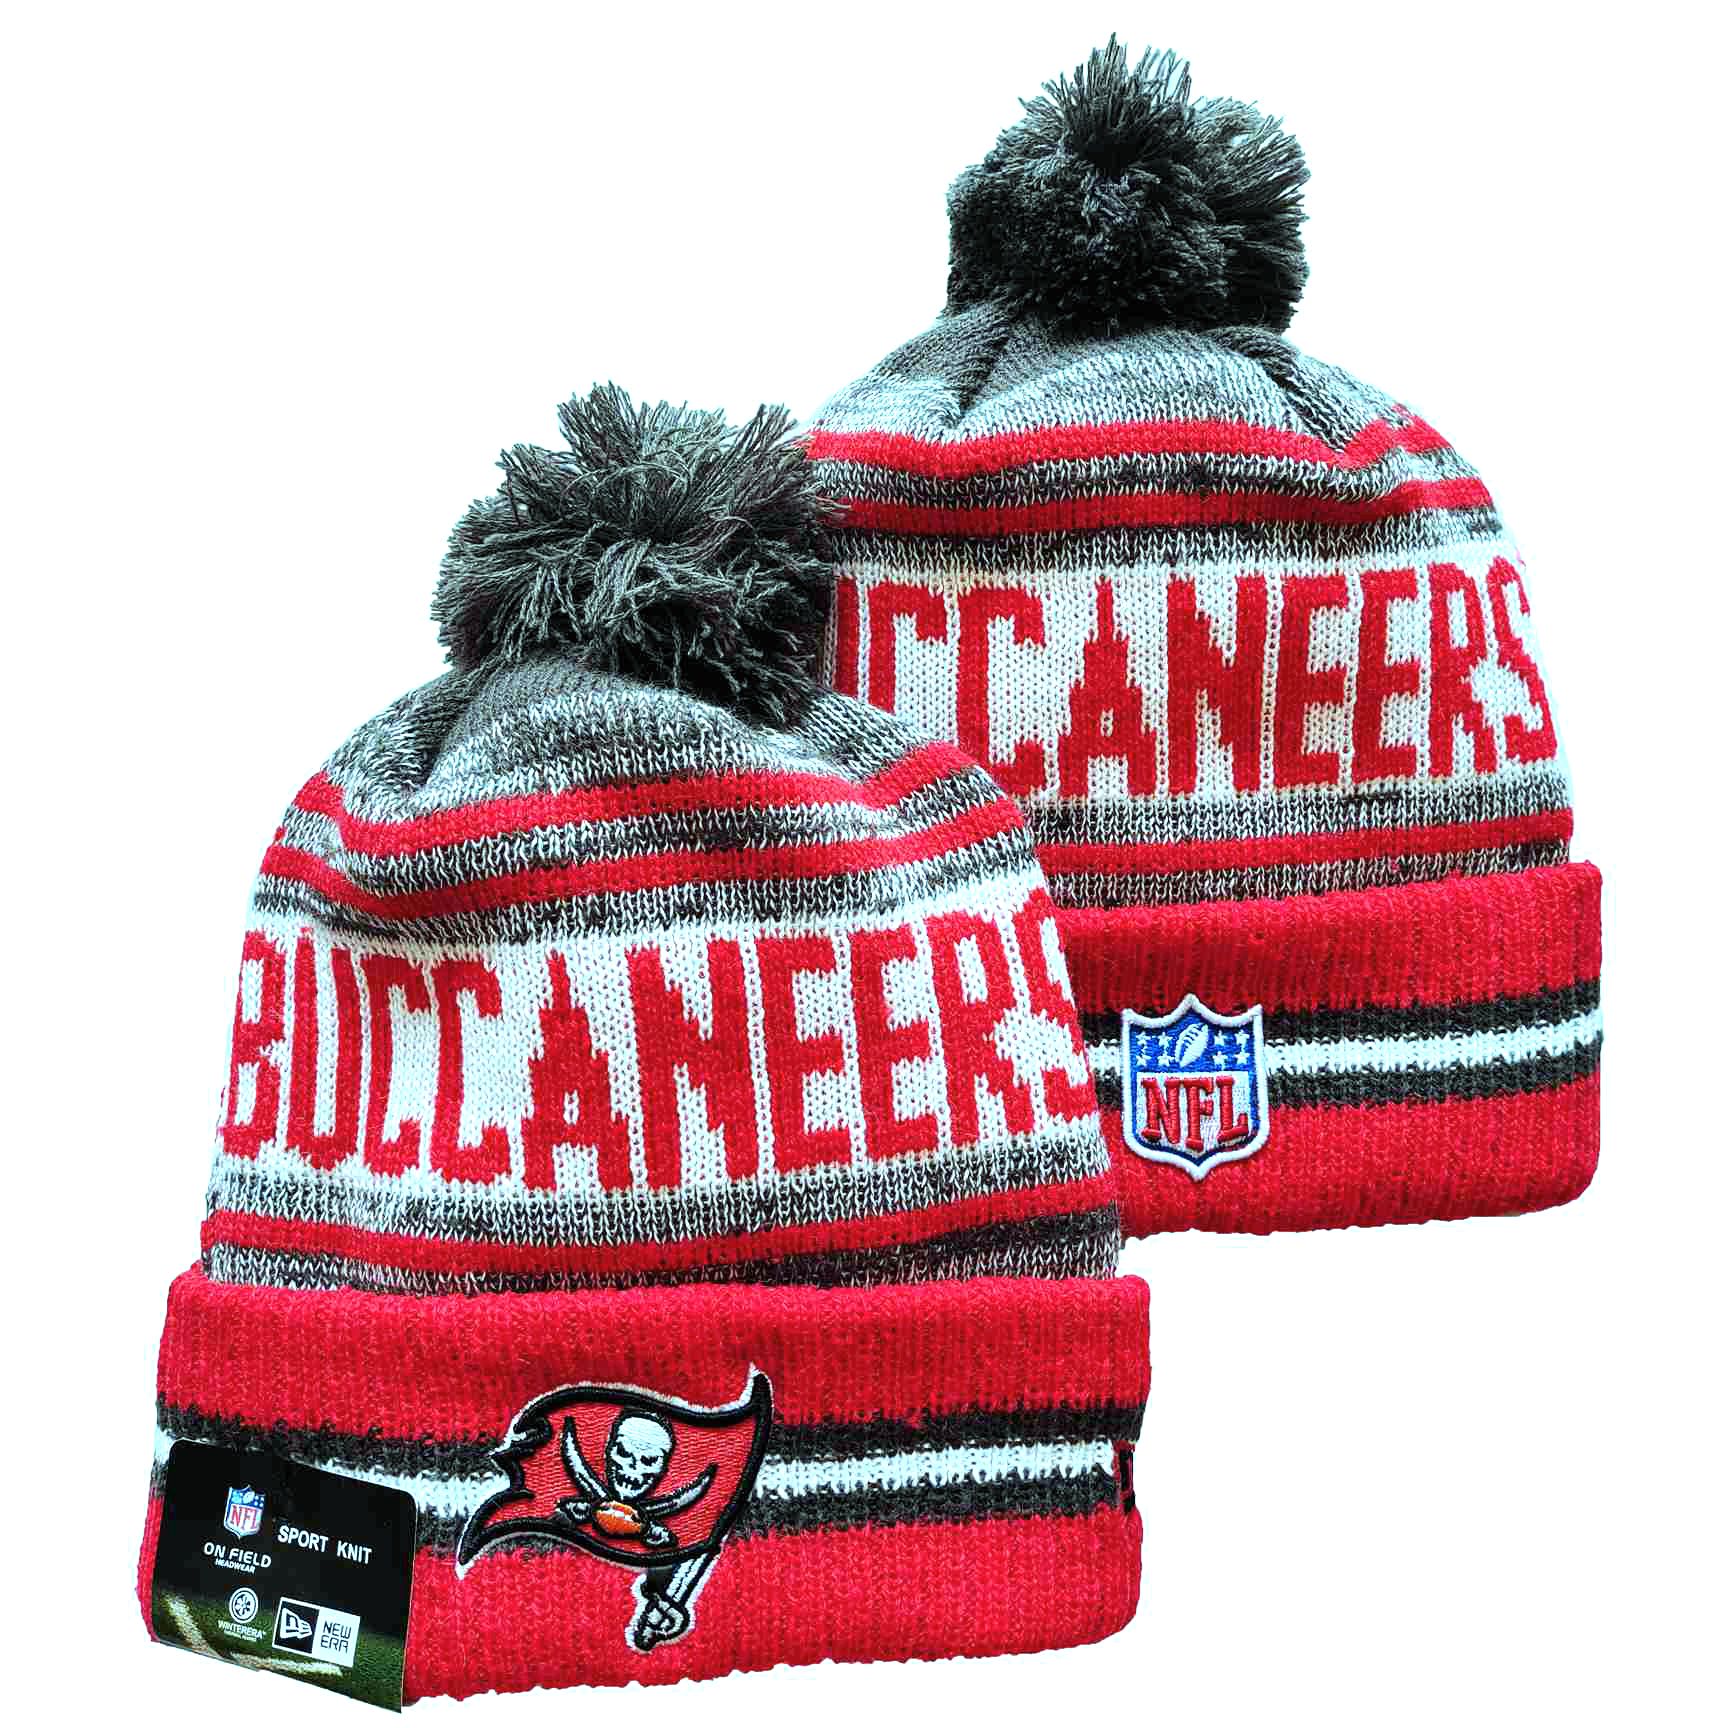 NFL Tampa Bay Buccaneers Beanies Knit Hats-YD1274